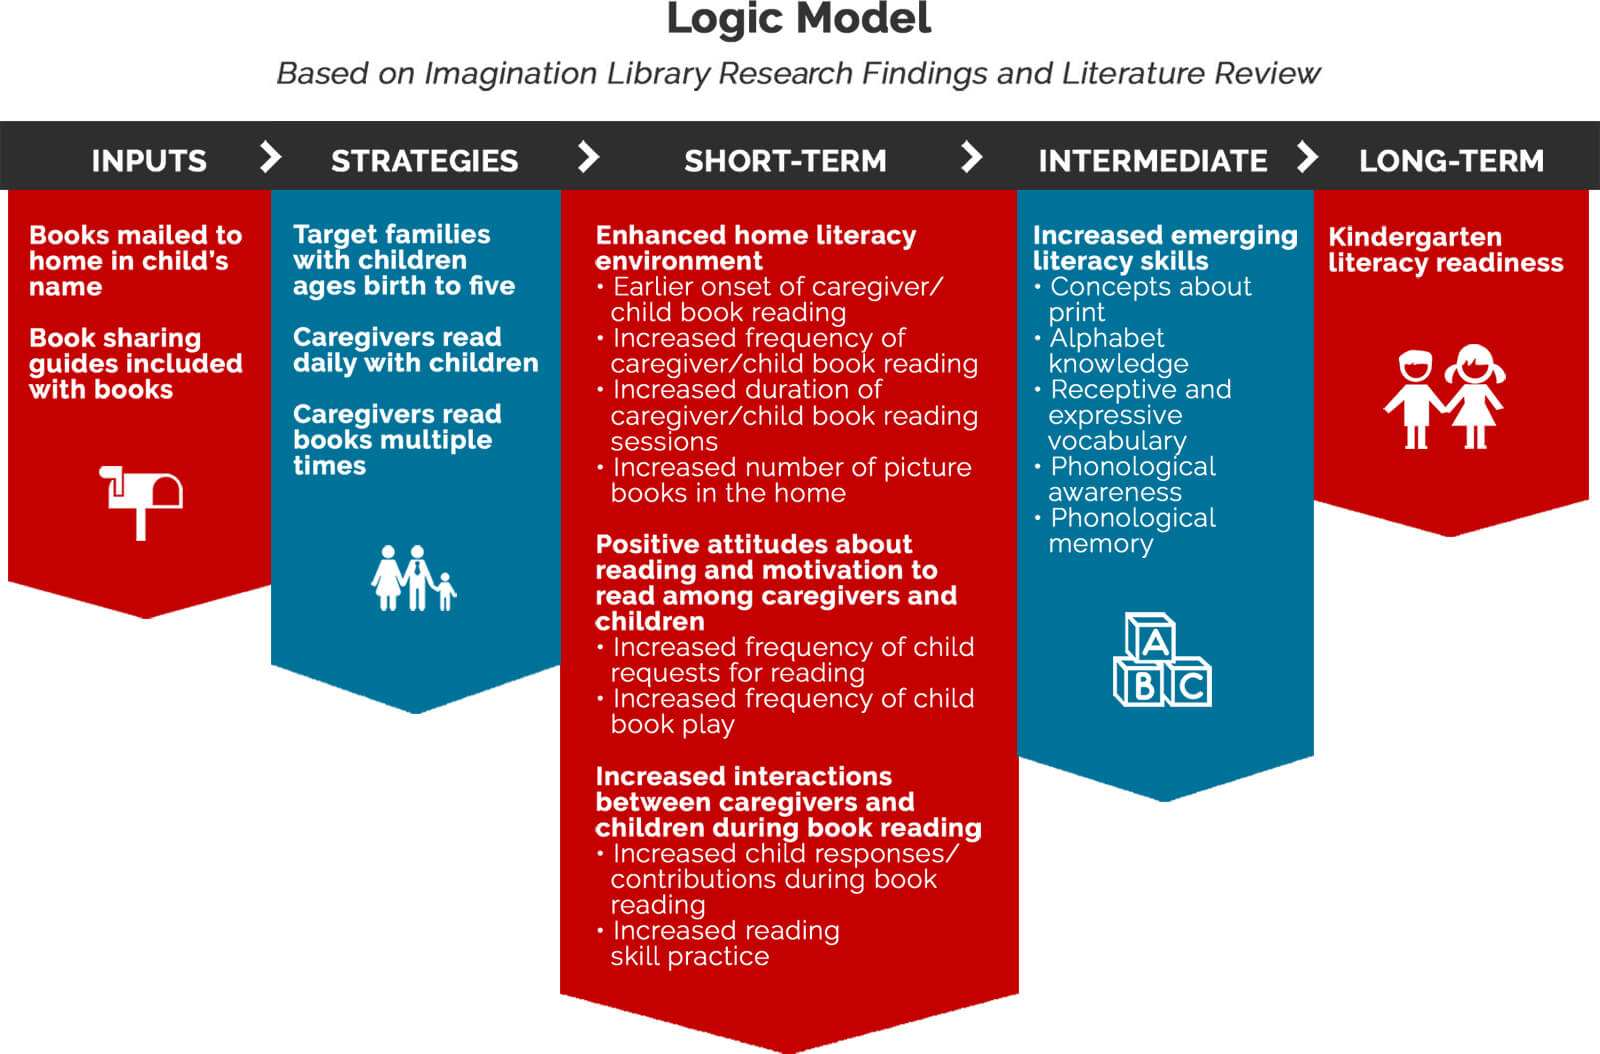 Imagination Library Research Logic Model